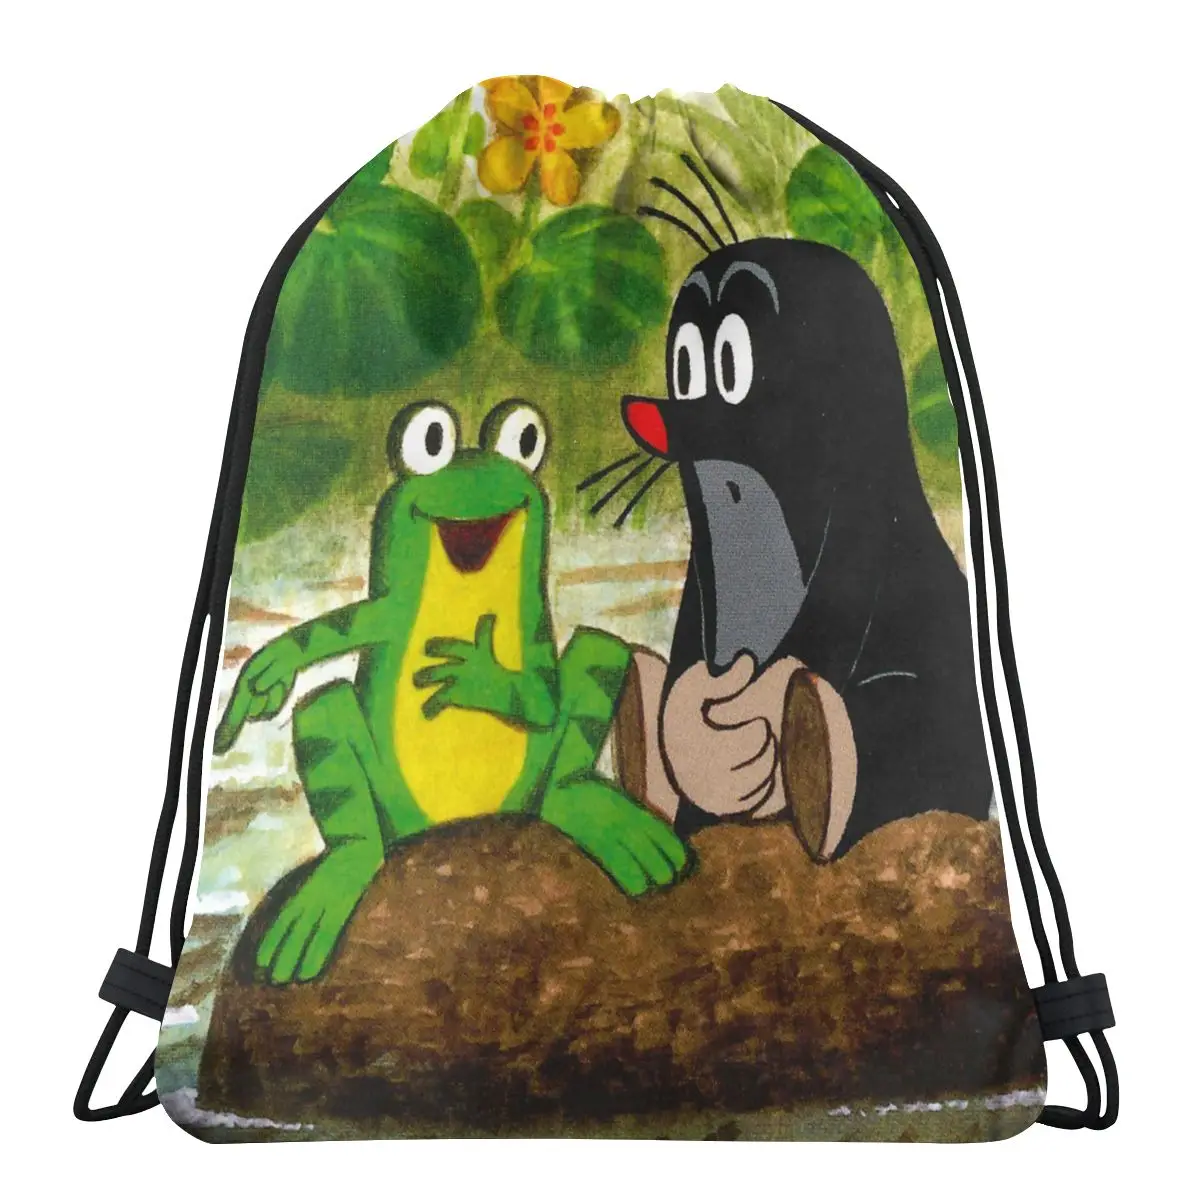 

Playing With The Frog Krtek Zdenik Miler Educational Animation Portable Hiking Drawstring Bags Riding Clothes Storage Backpacks